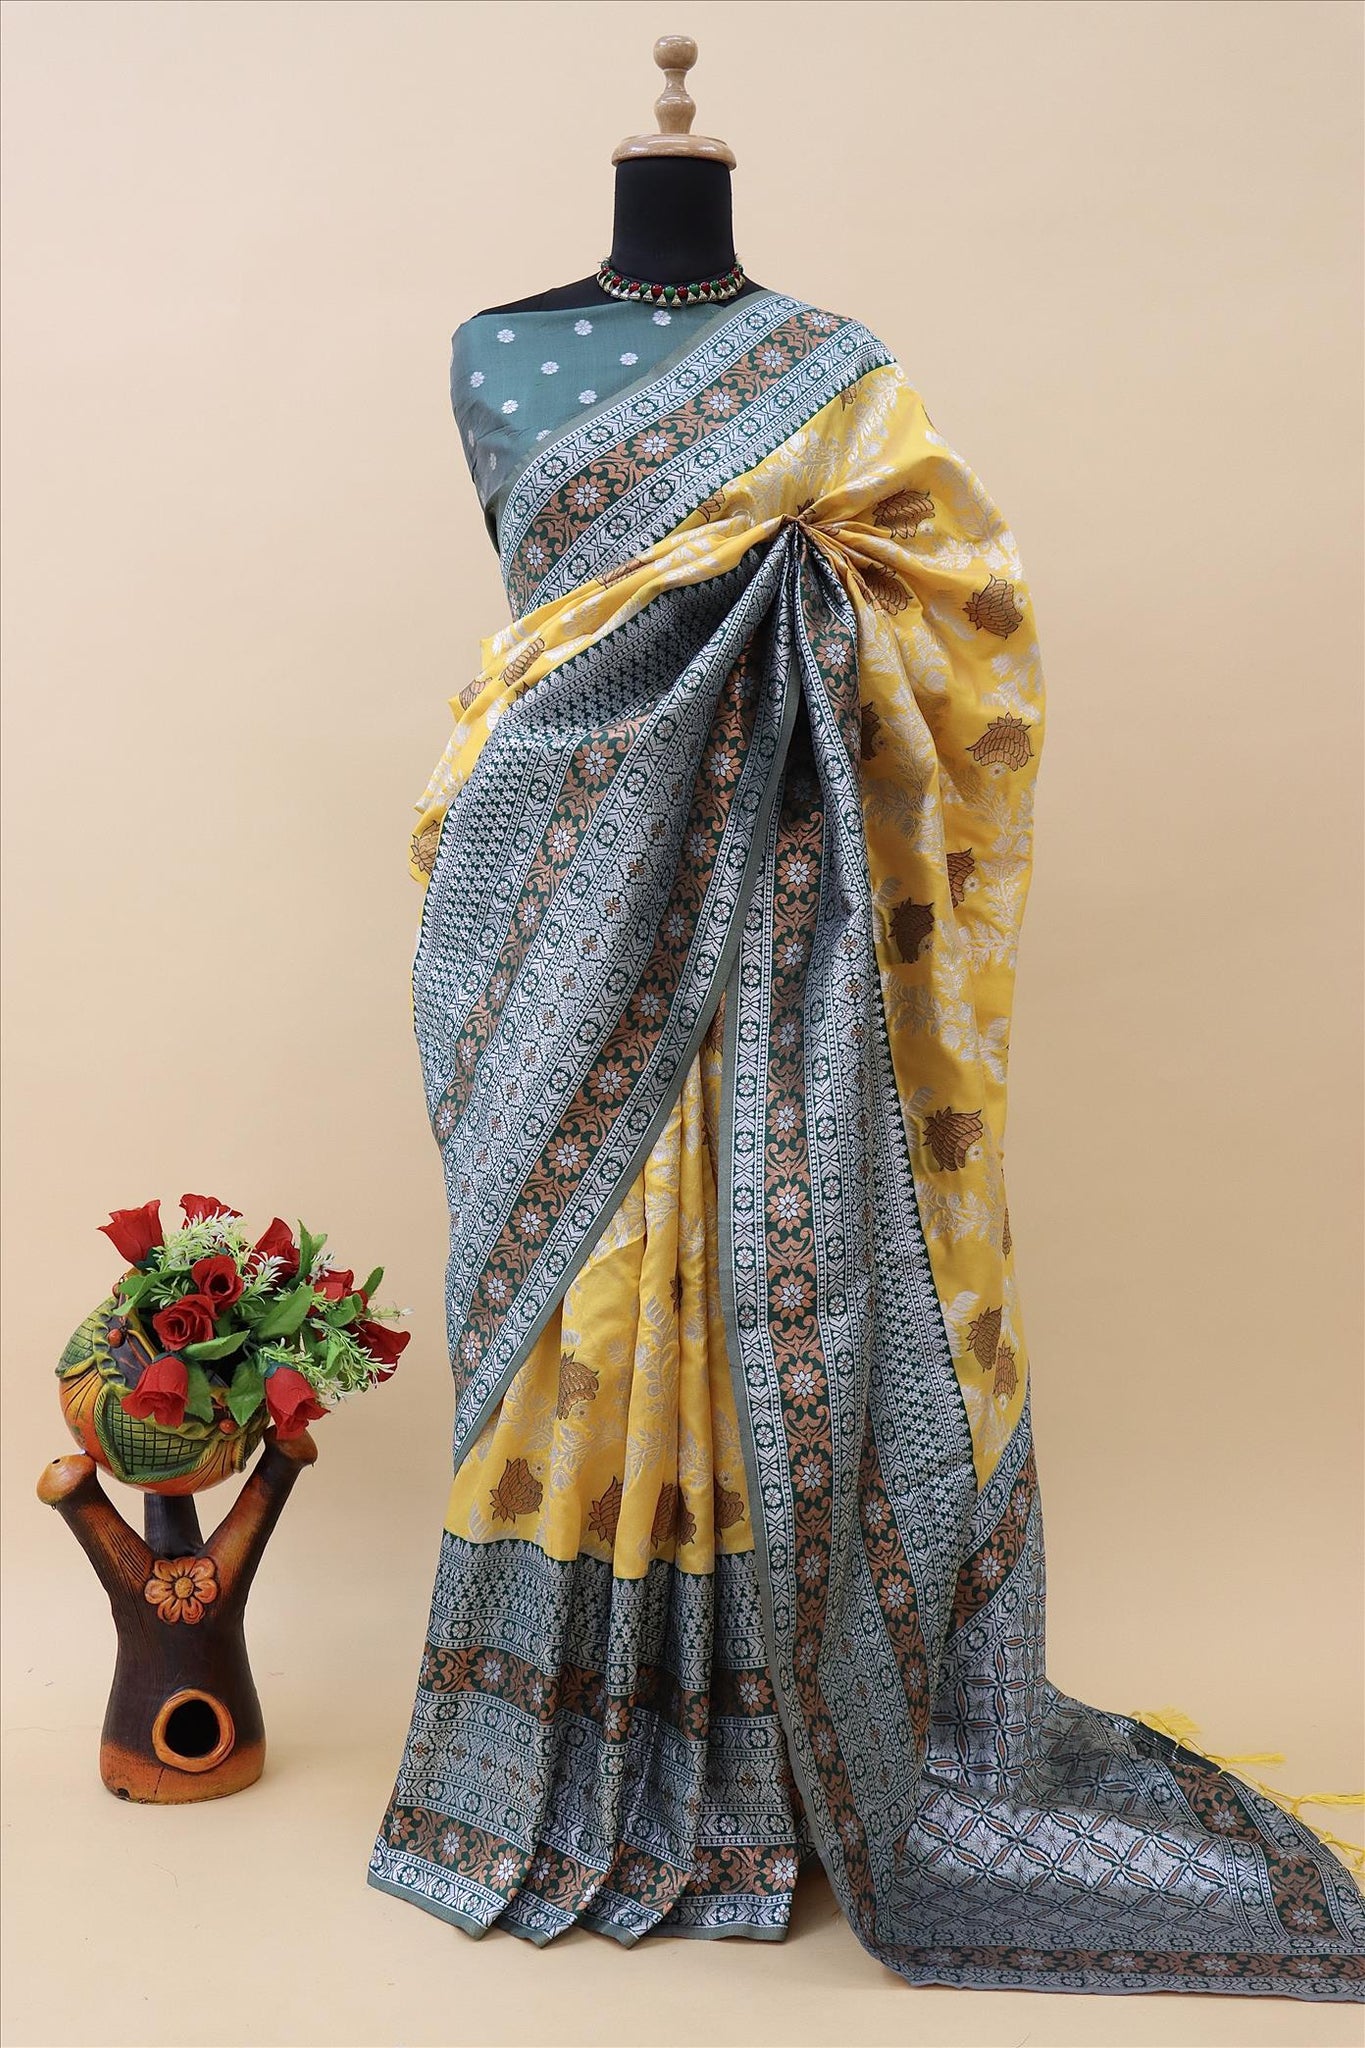 Gold With Bottle Green Contrast With Silver And Copper Jari Jacquard Pattu Saree-mb's 4 Fider Jps-1035